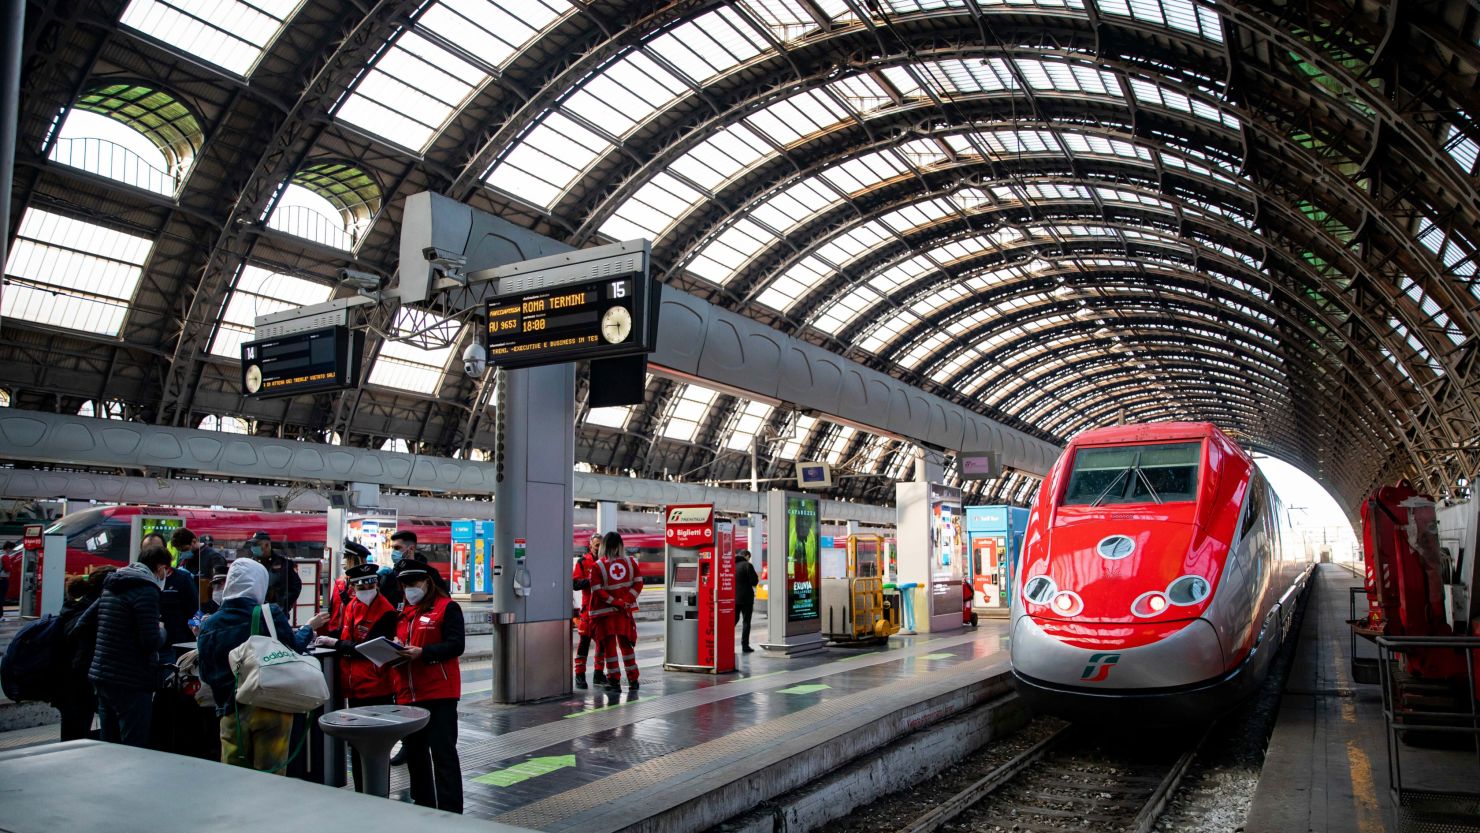 Italy's high-speed train network has captured the former market for domestic flights.